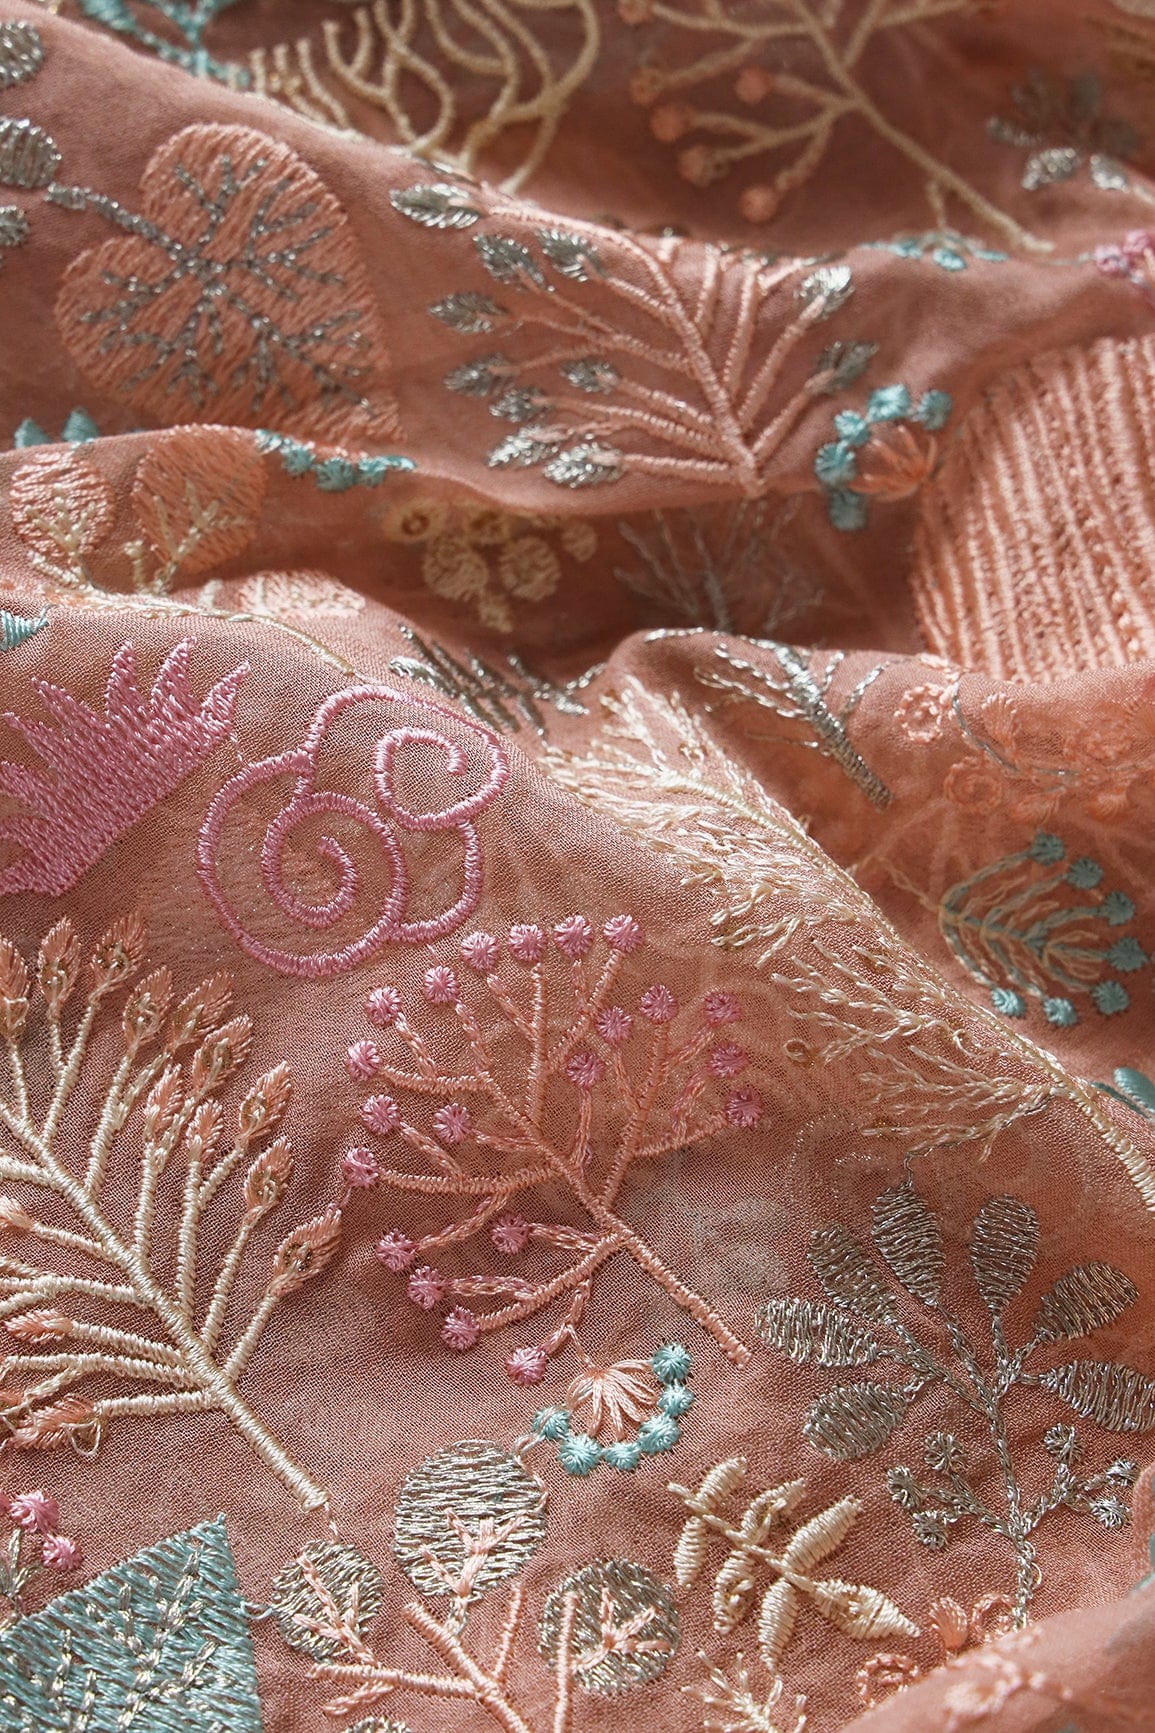 doeraa Embroidery Fabrics 1 Meter Cut Piece Of Multi Thread Beautiful Floral Embroidery On Peach Viscose Georgette Fabric